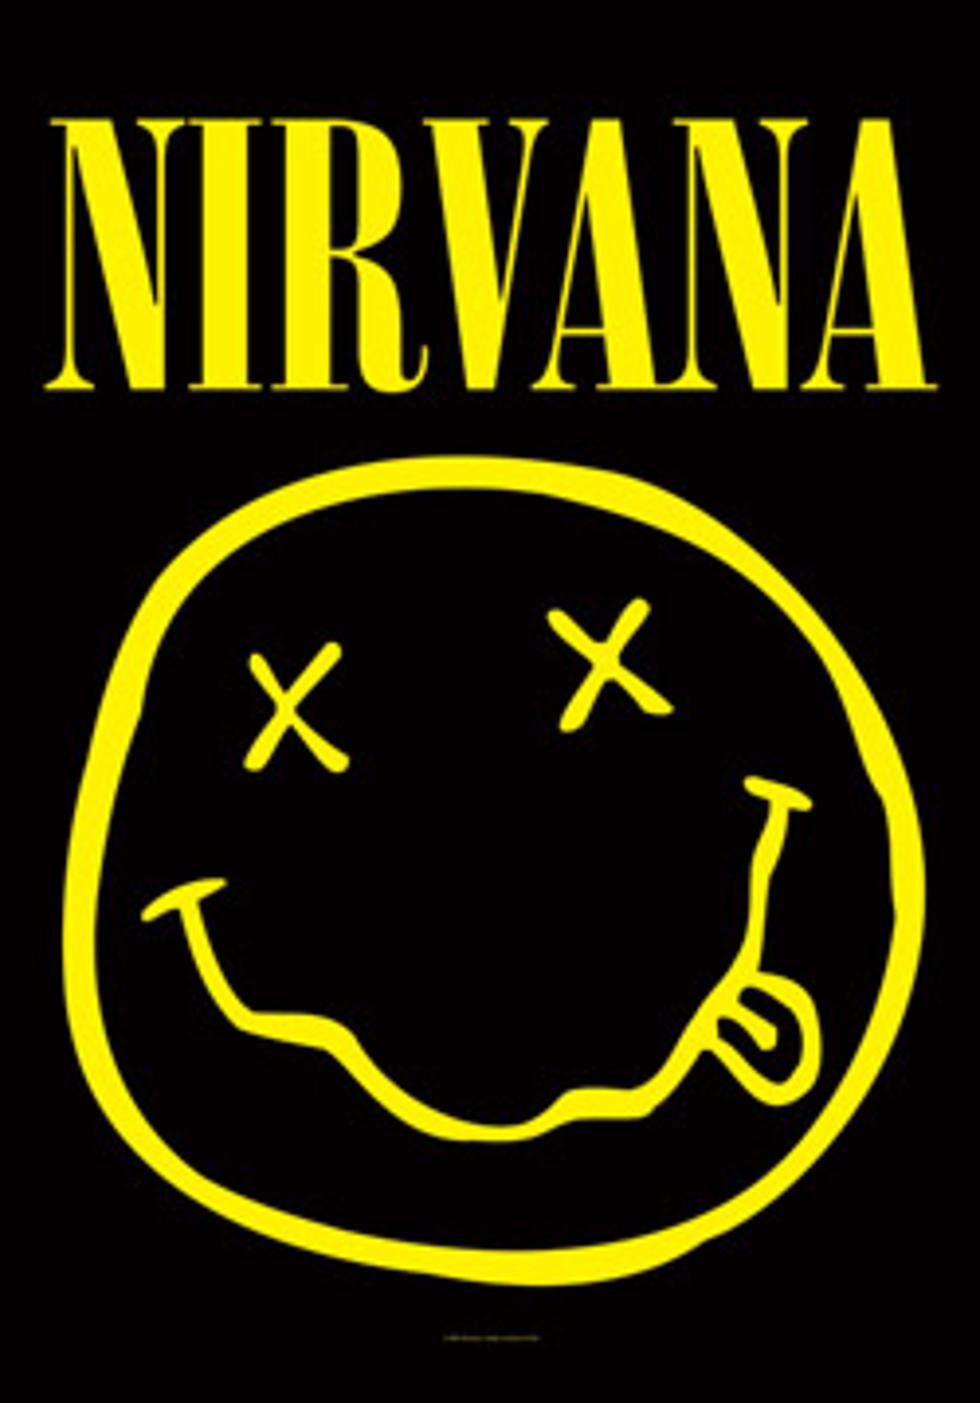 Marc Jacobs Denies Ripping Off Nirvana Smiley Face